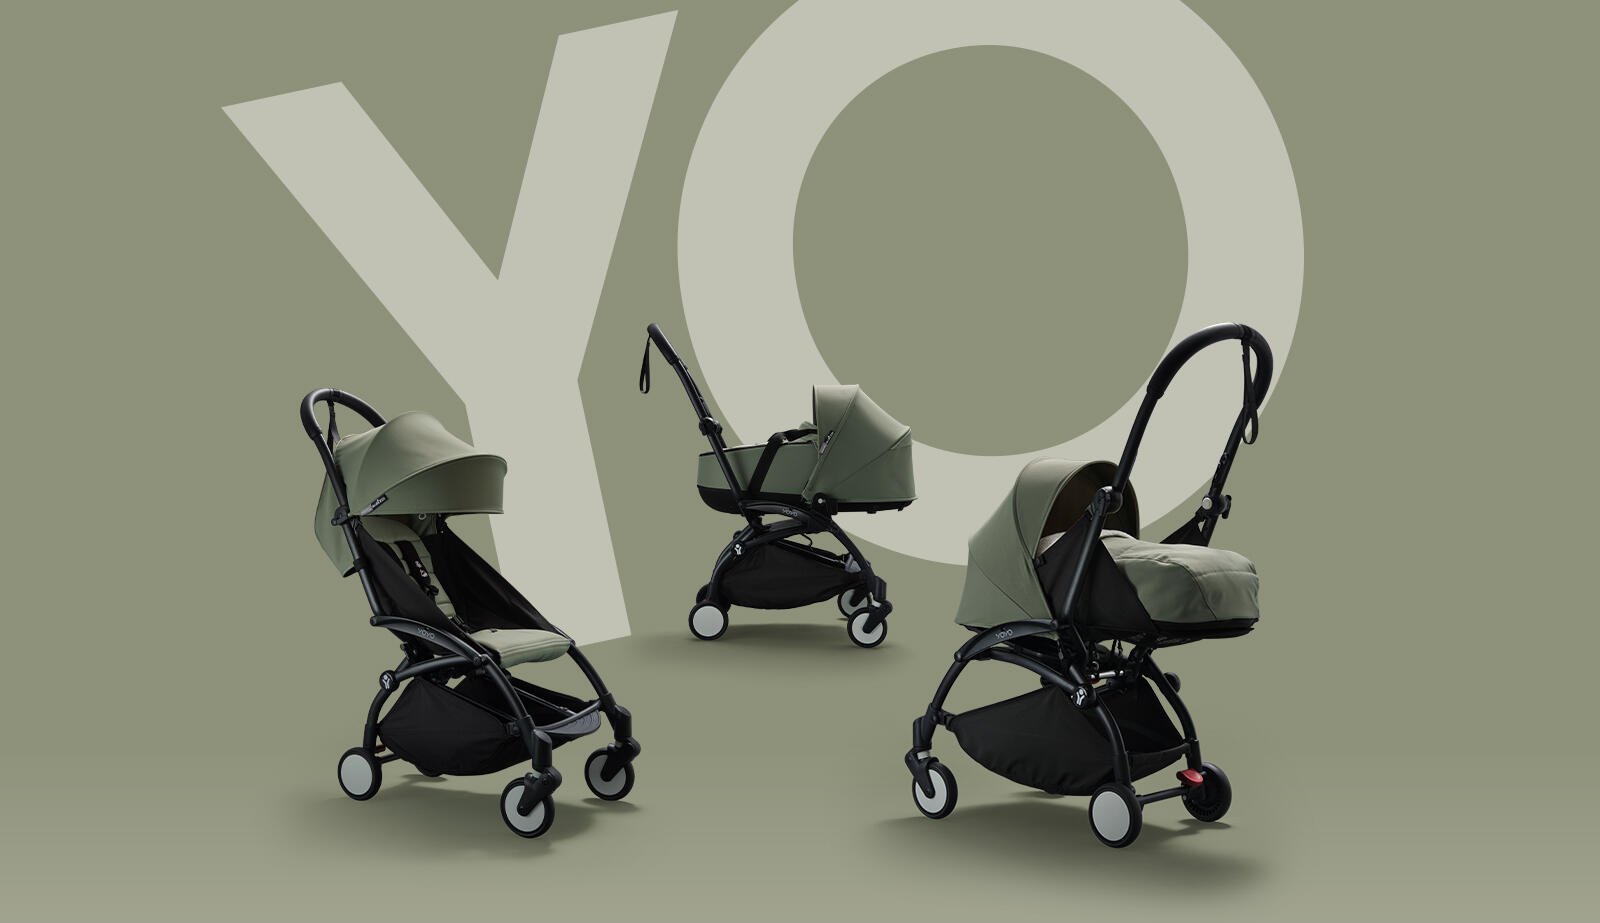 Betsy Trotwood Indgang Martin Luther King Junior Baby and Toddler Strollers | BABYZEN™ YOYO²